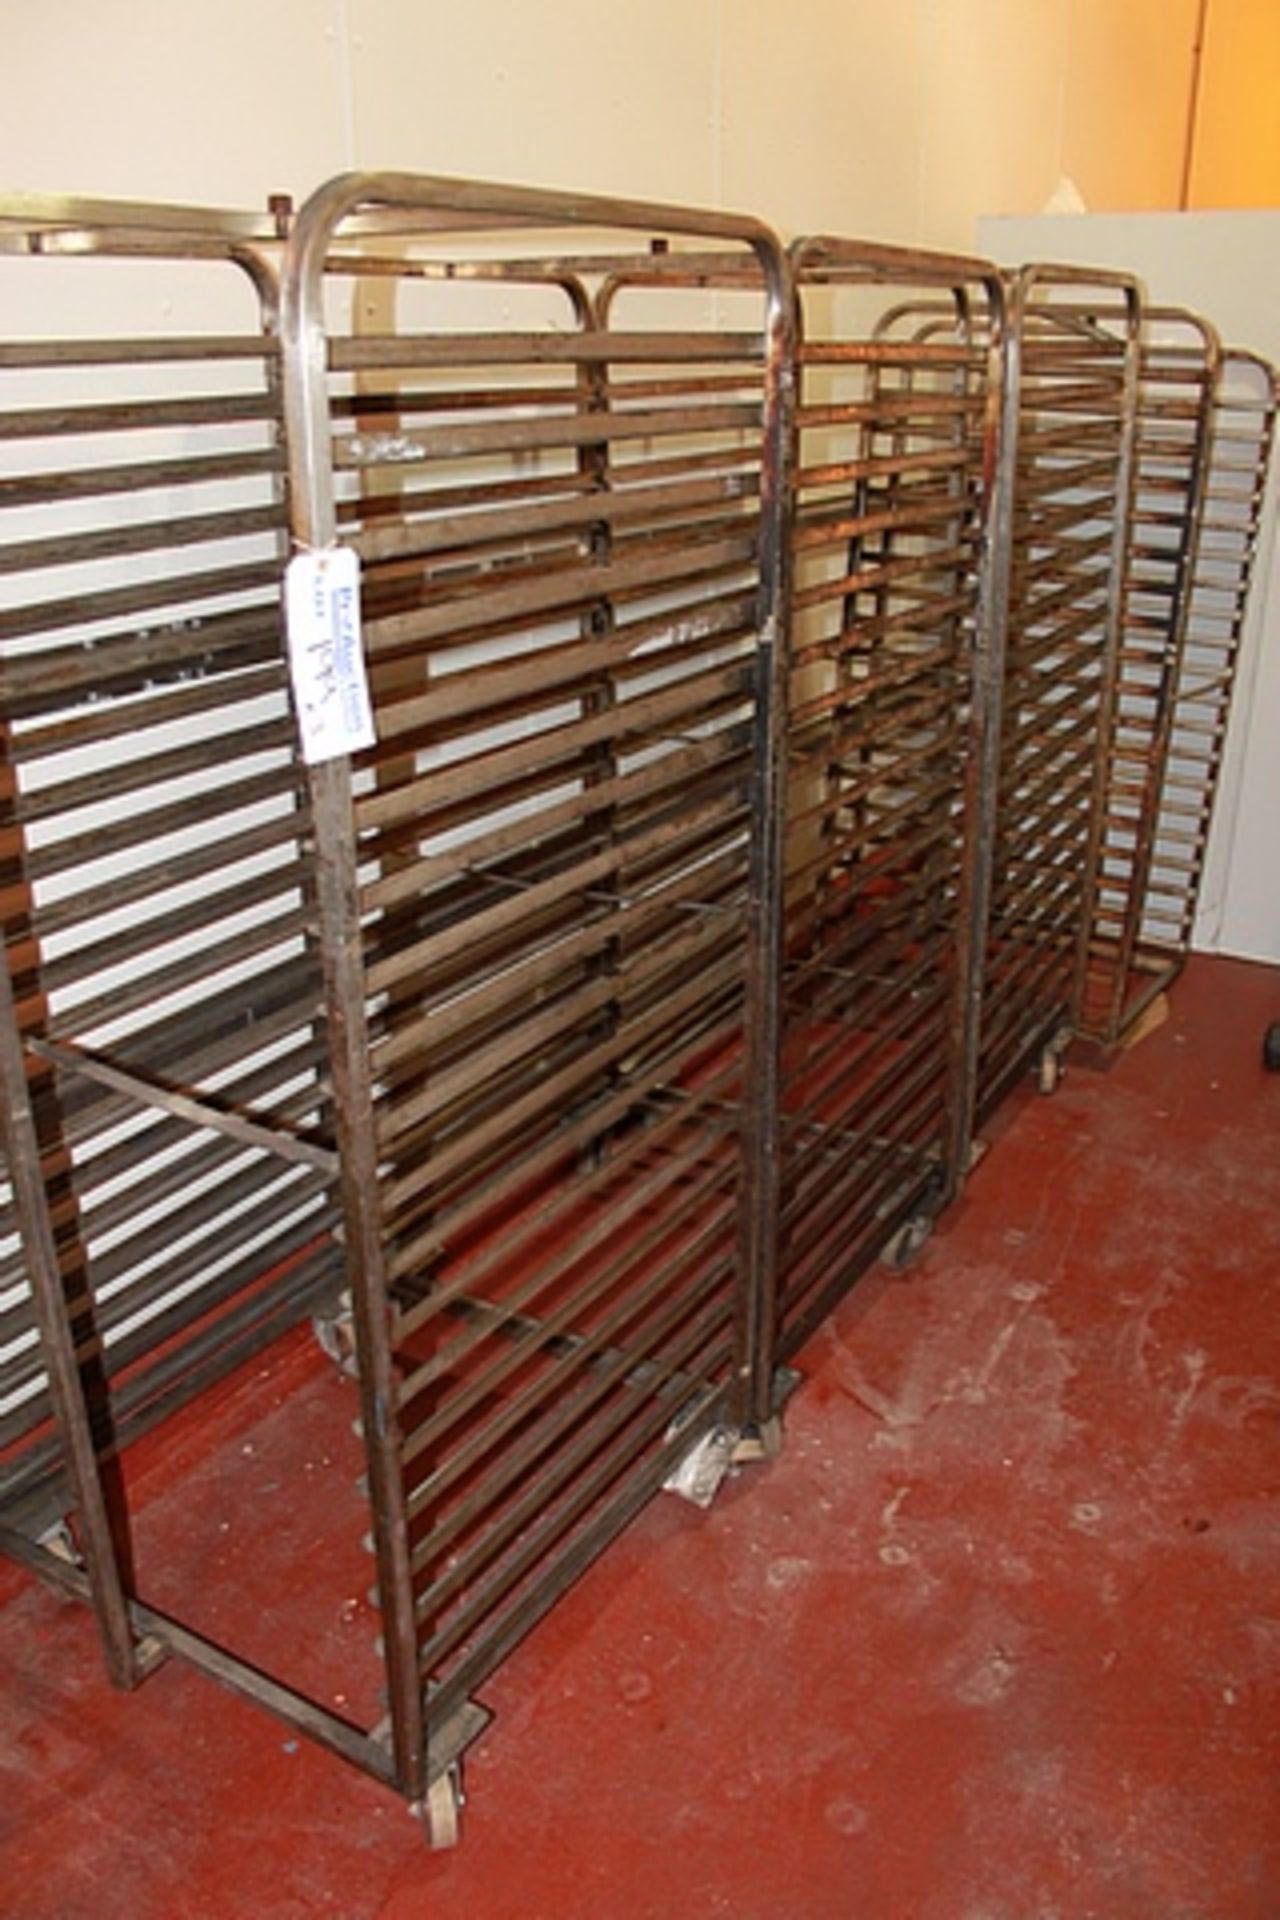 3 x stainless steel bakery racking trolley mobile 20 tier double stack 770mm x 820mm x 1800mm